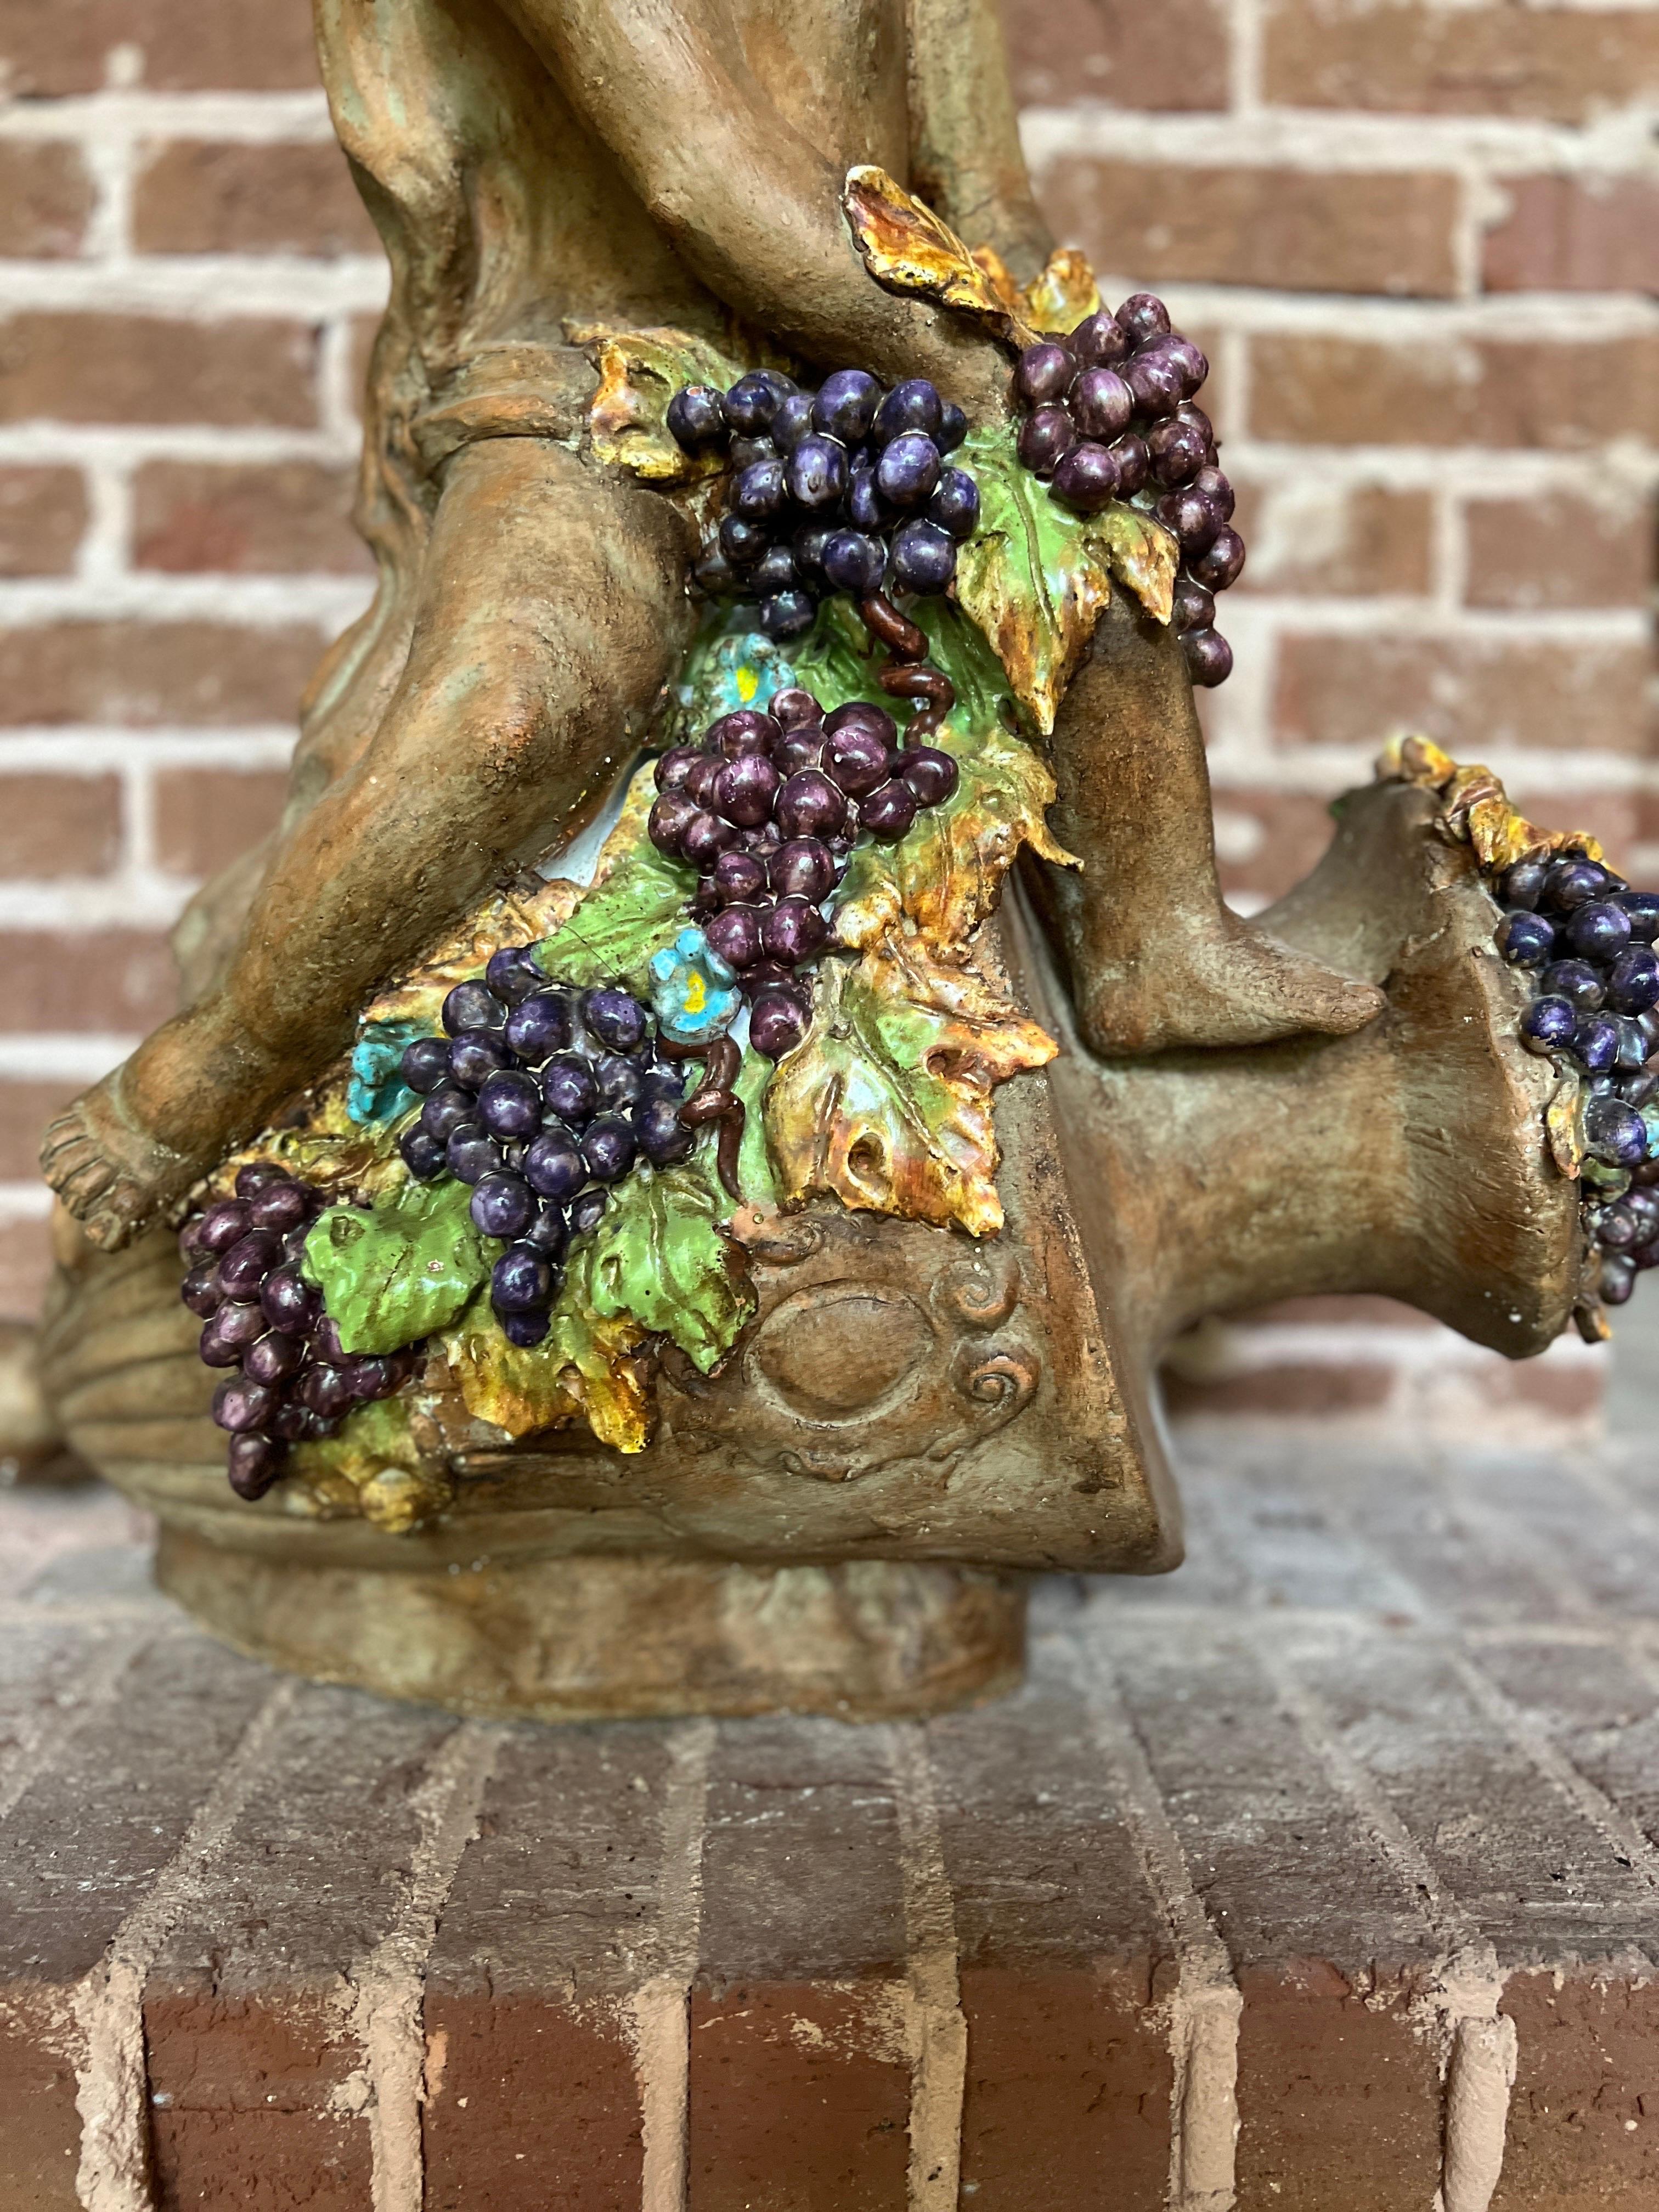 Italian, mid 20th century.

Large Italian Terracotta Putti & Grape Vine Adorning a Wine Vessel Sculpture

Presenting a captivating masterpiece of Italian artistry, this Large Terracotta Sculpture adorned with Paint Decorated Putti stands as a